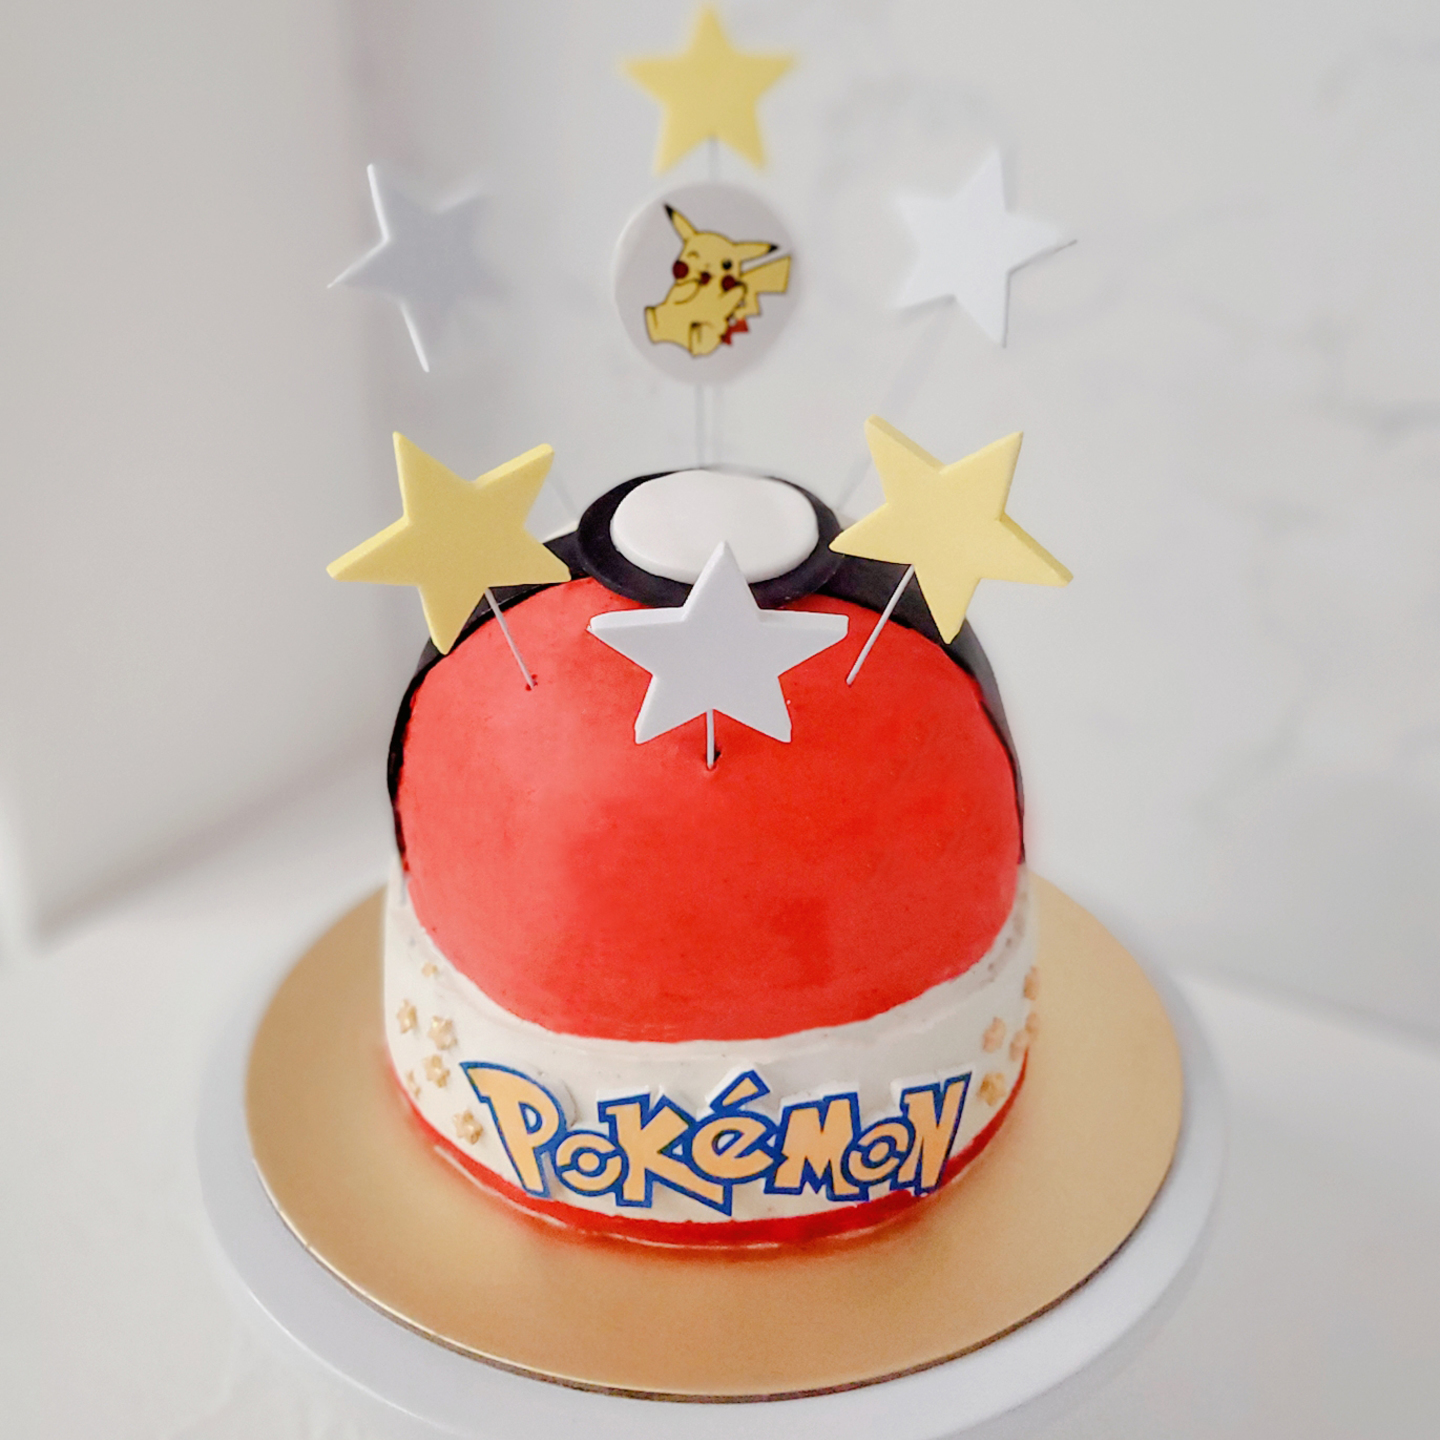 Pokeball Cake With Decorative Toppers 